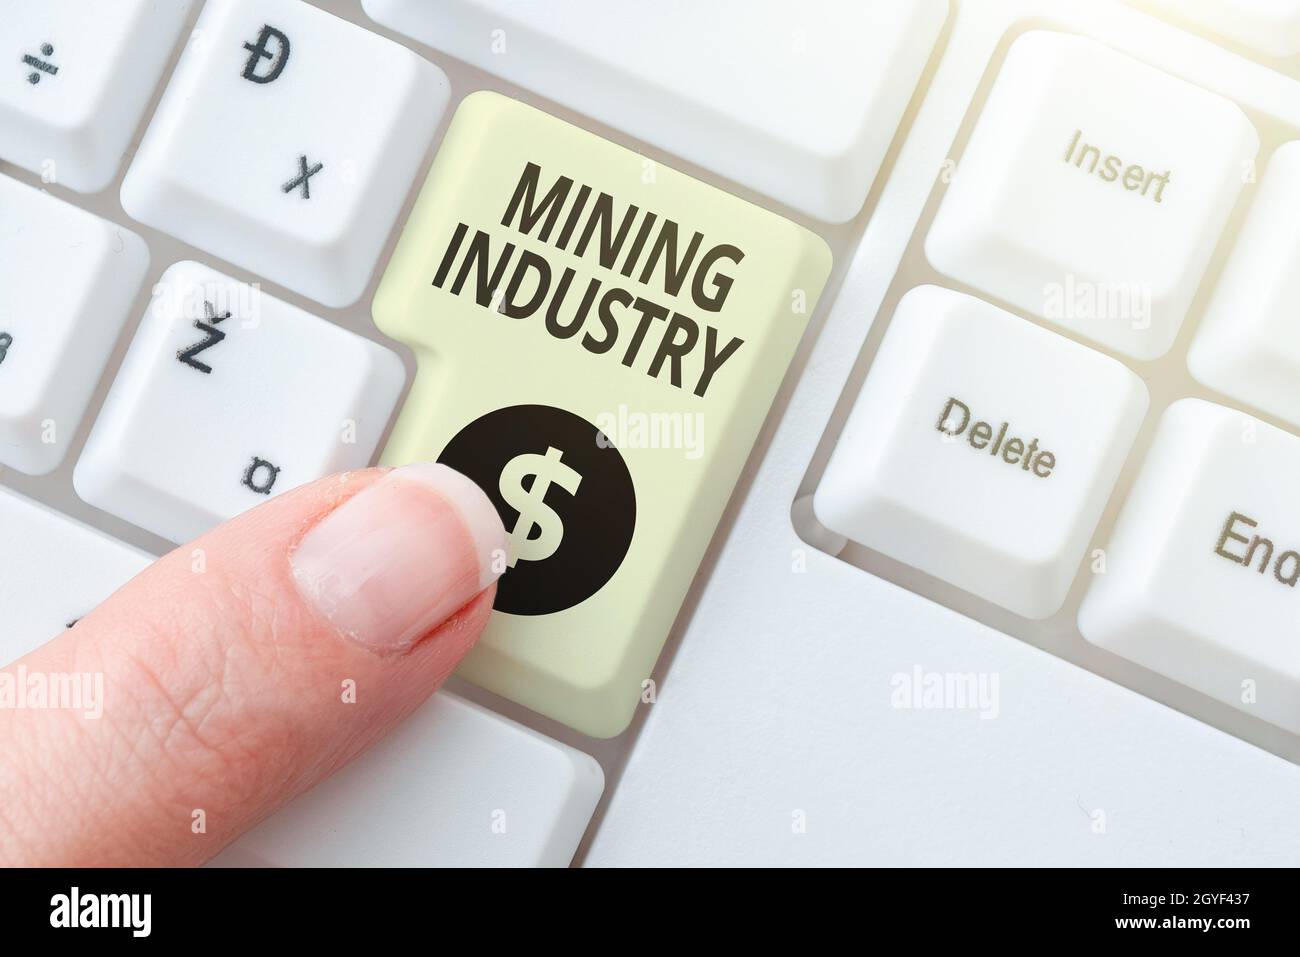 Text showing inspiration Mining Industry, Business showcase extraction of precious minerals and geological materials Transcribing Internet Meeting Aud Stock Photo